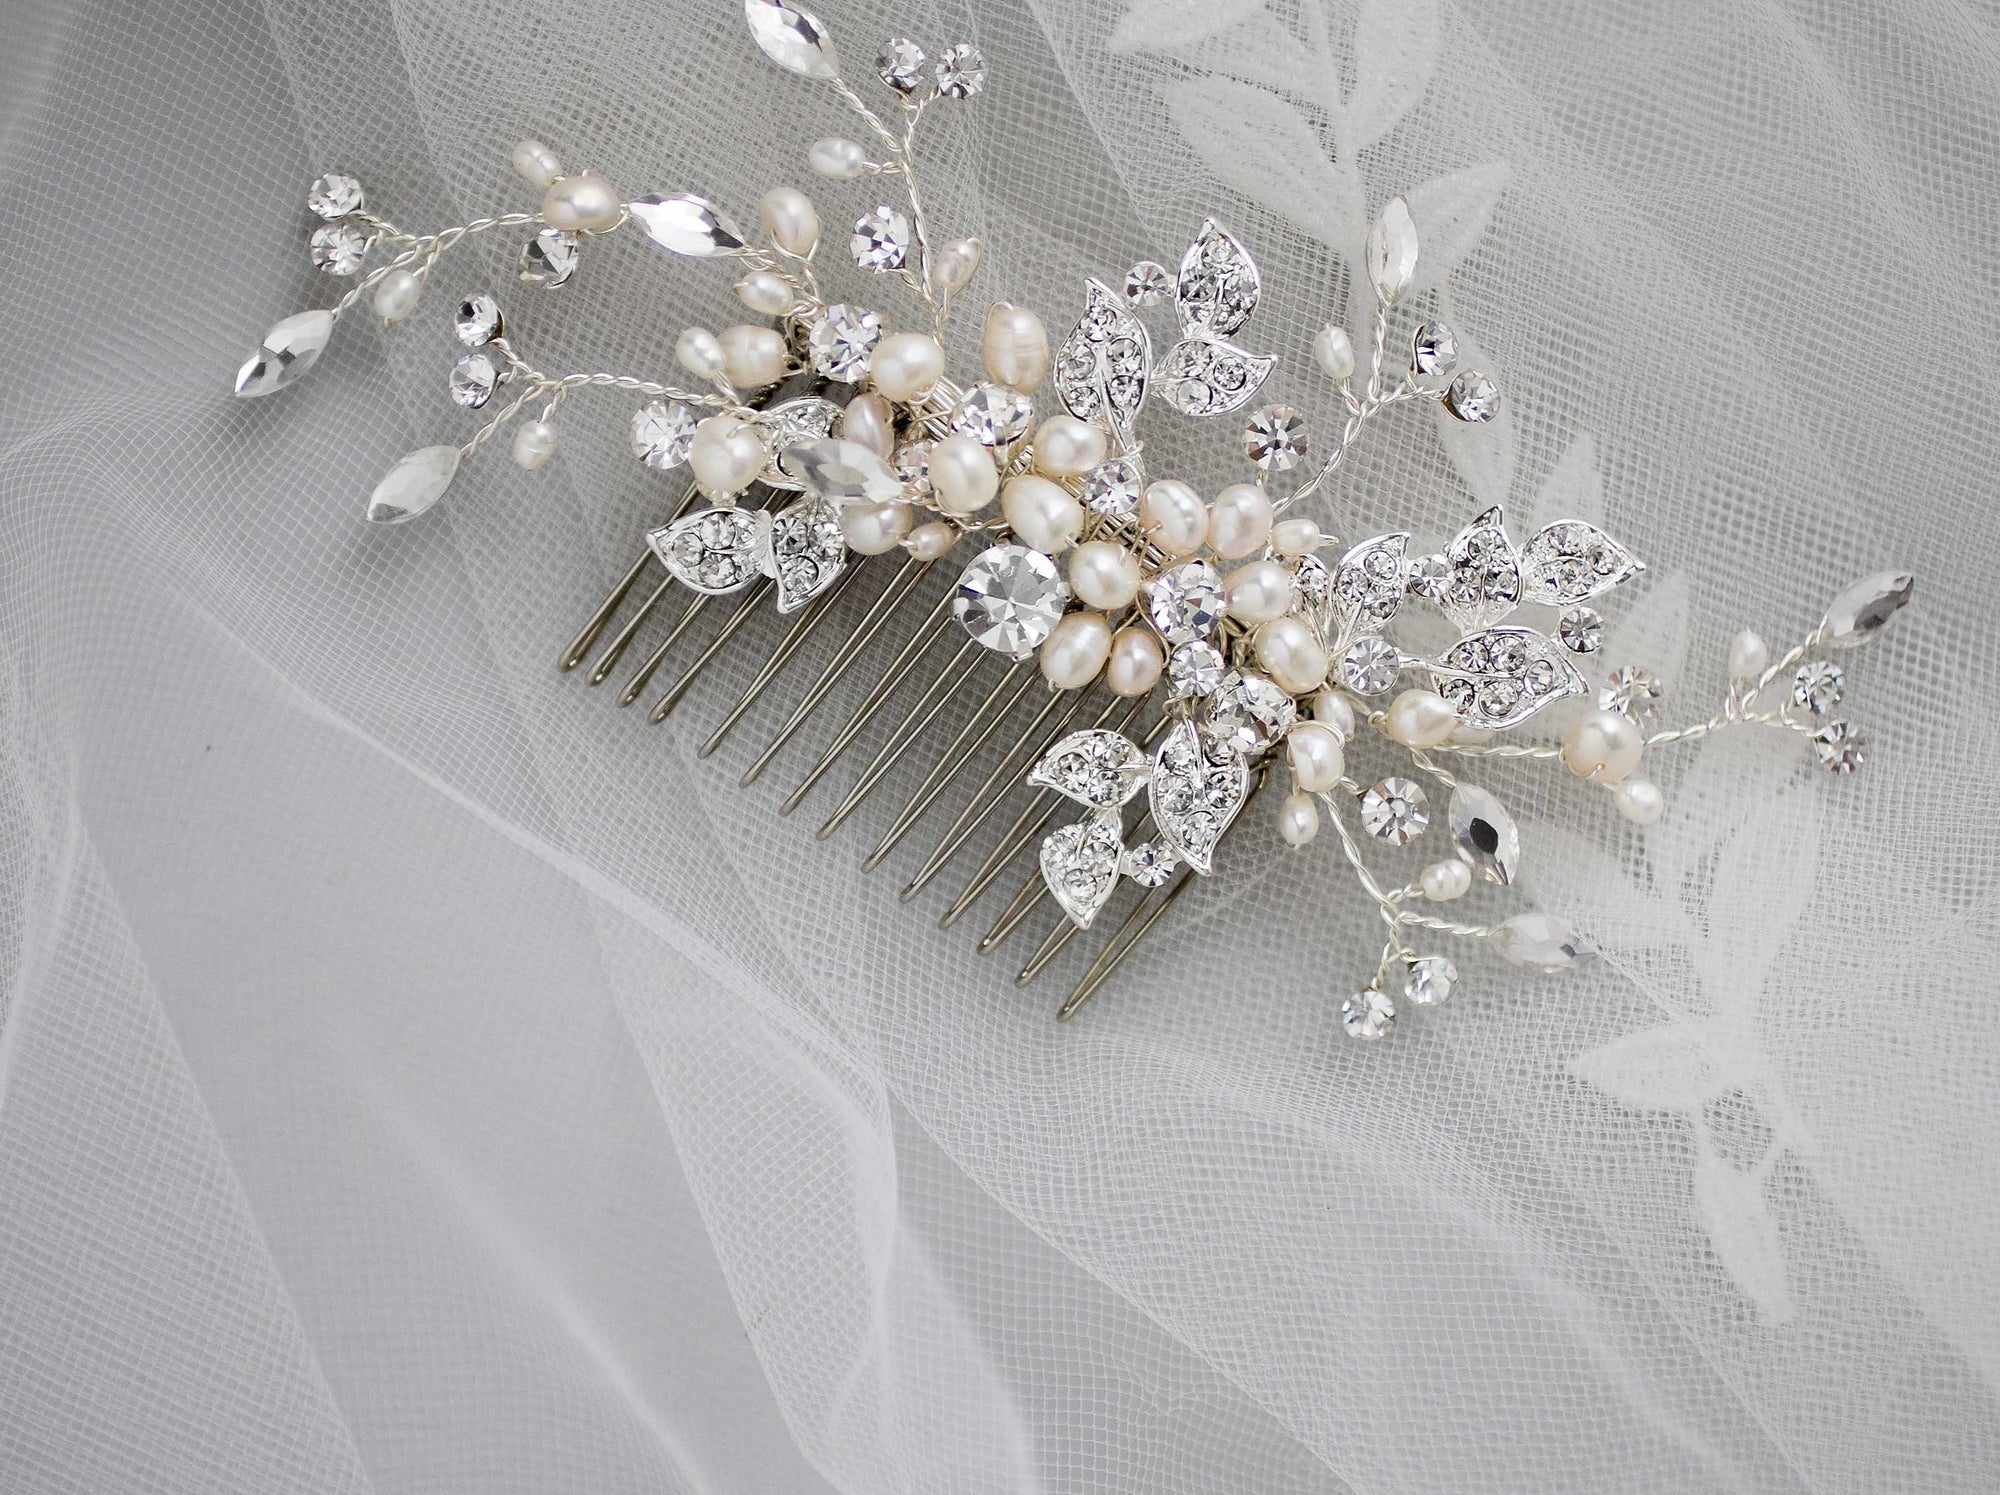 Crystal Beads and Leaves Wedding Hair Comb